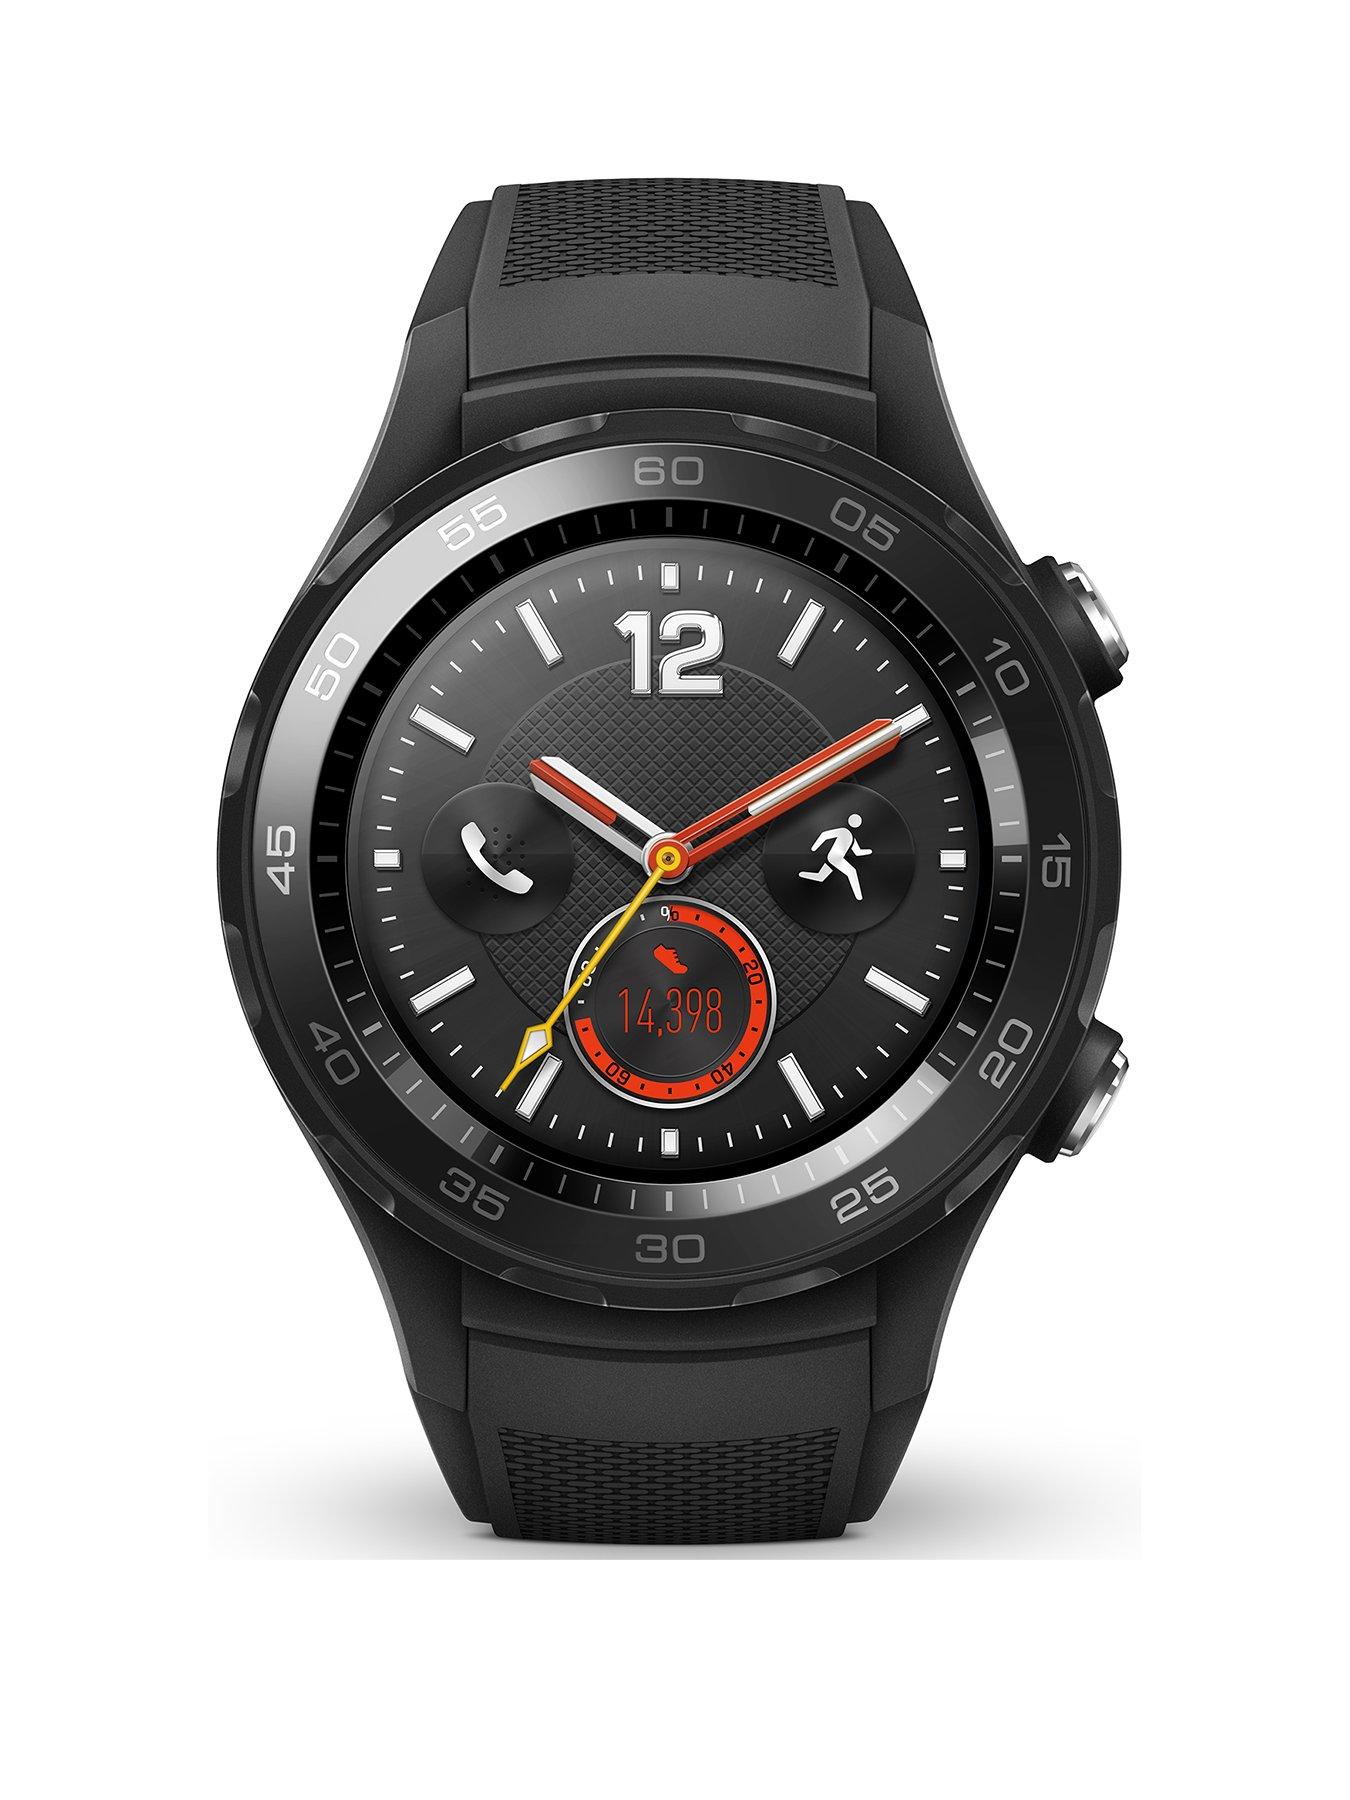 smartwatch huawei 1 watch 2 lte bluetooth android/ios 4